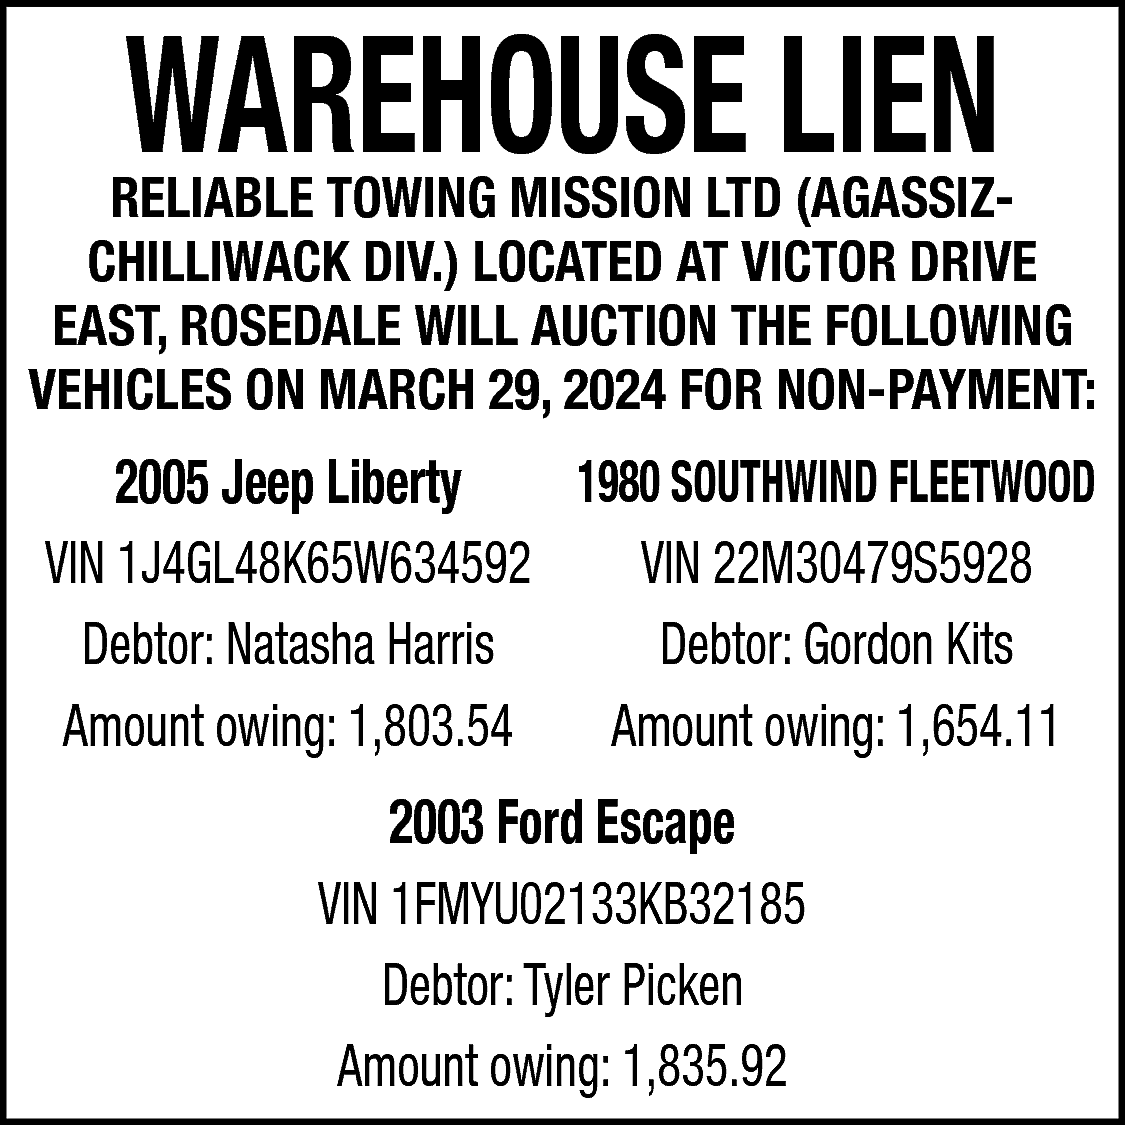 WAREHOUSE LIEN <br> <br>RELIABLE TOWING  WAREHOUSE LIEN    RELIABLE TOWING MISSION LTD (AGASSIZCHILLIWACK DIV.) LOCATED AT VICTOR DRIVE  EAST, ROSEDALE WILL AUCTION THE FOLLOWING  VEHICLES ON MARCH 29, 2024 FOR NON-PAYMENT:    2005 Jeep Liberty  1980 SOUTHWIND FLEETWOOD  VIN 1J4GL48K65W634592  VIN 22M30479S5928  Debtor: Natasha Harris  Debtor: Gordon Kits  Amount owing: 1,803.54  Amount owing: 1,654.11  2003 Ford Escape  VIN 1FMYU02133KB32185  Debtor: Tyler Picken  Amount owing: 1,835.92    